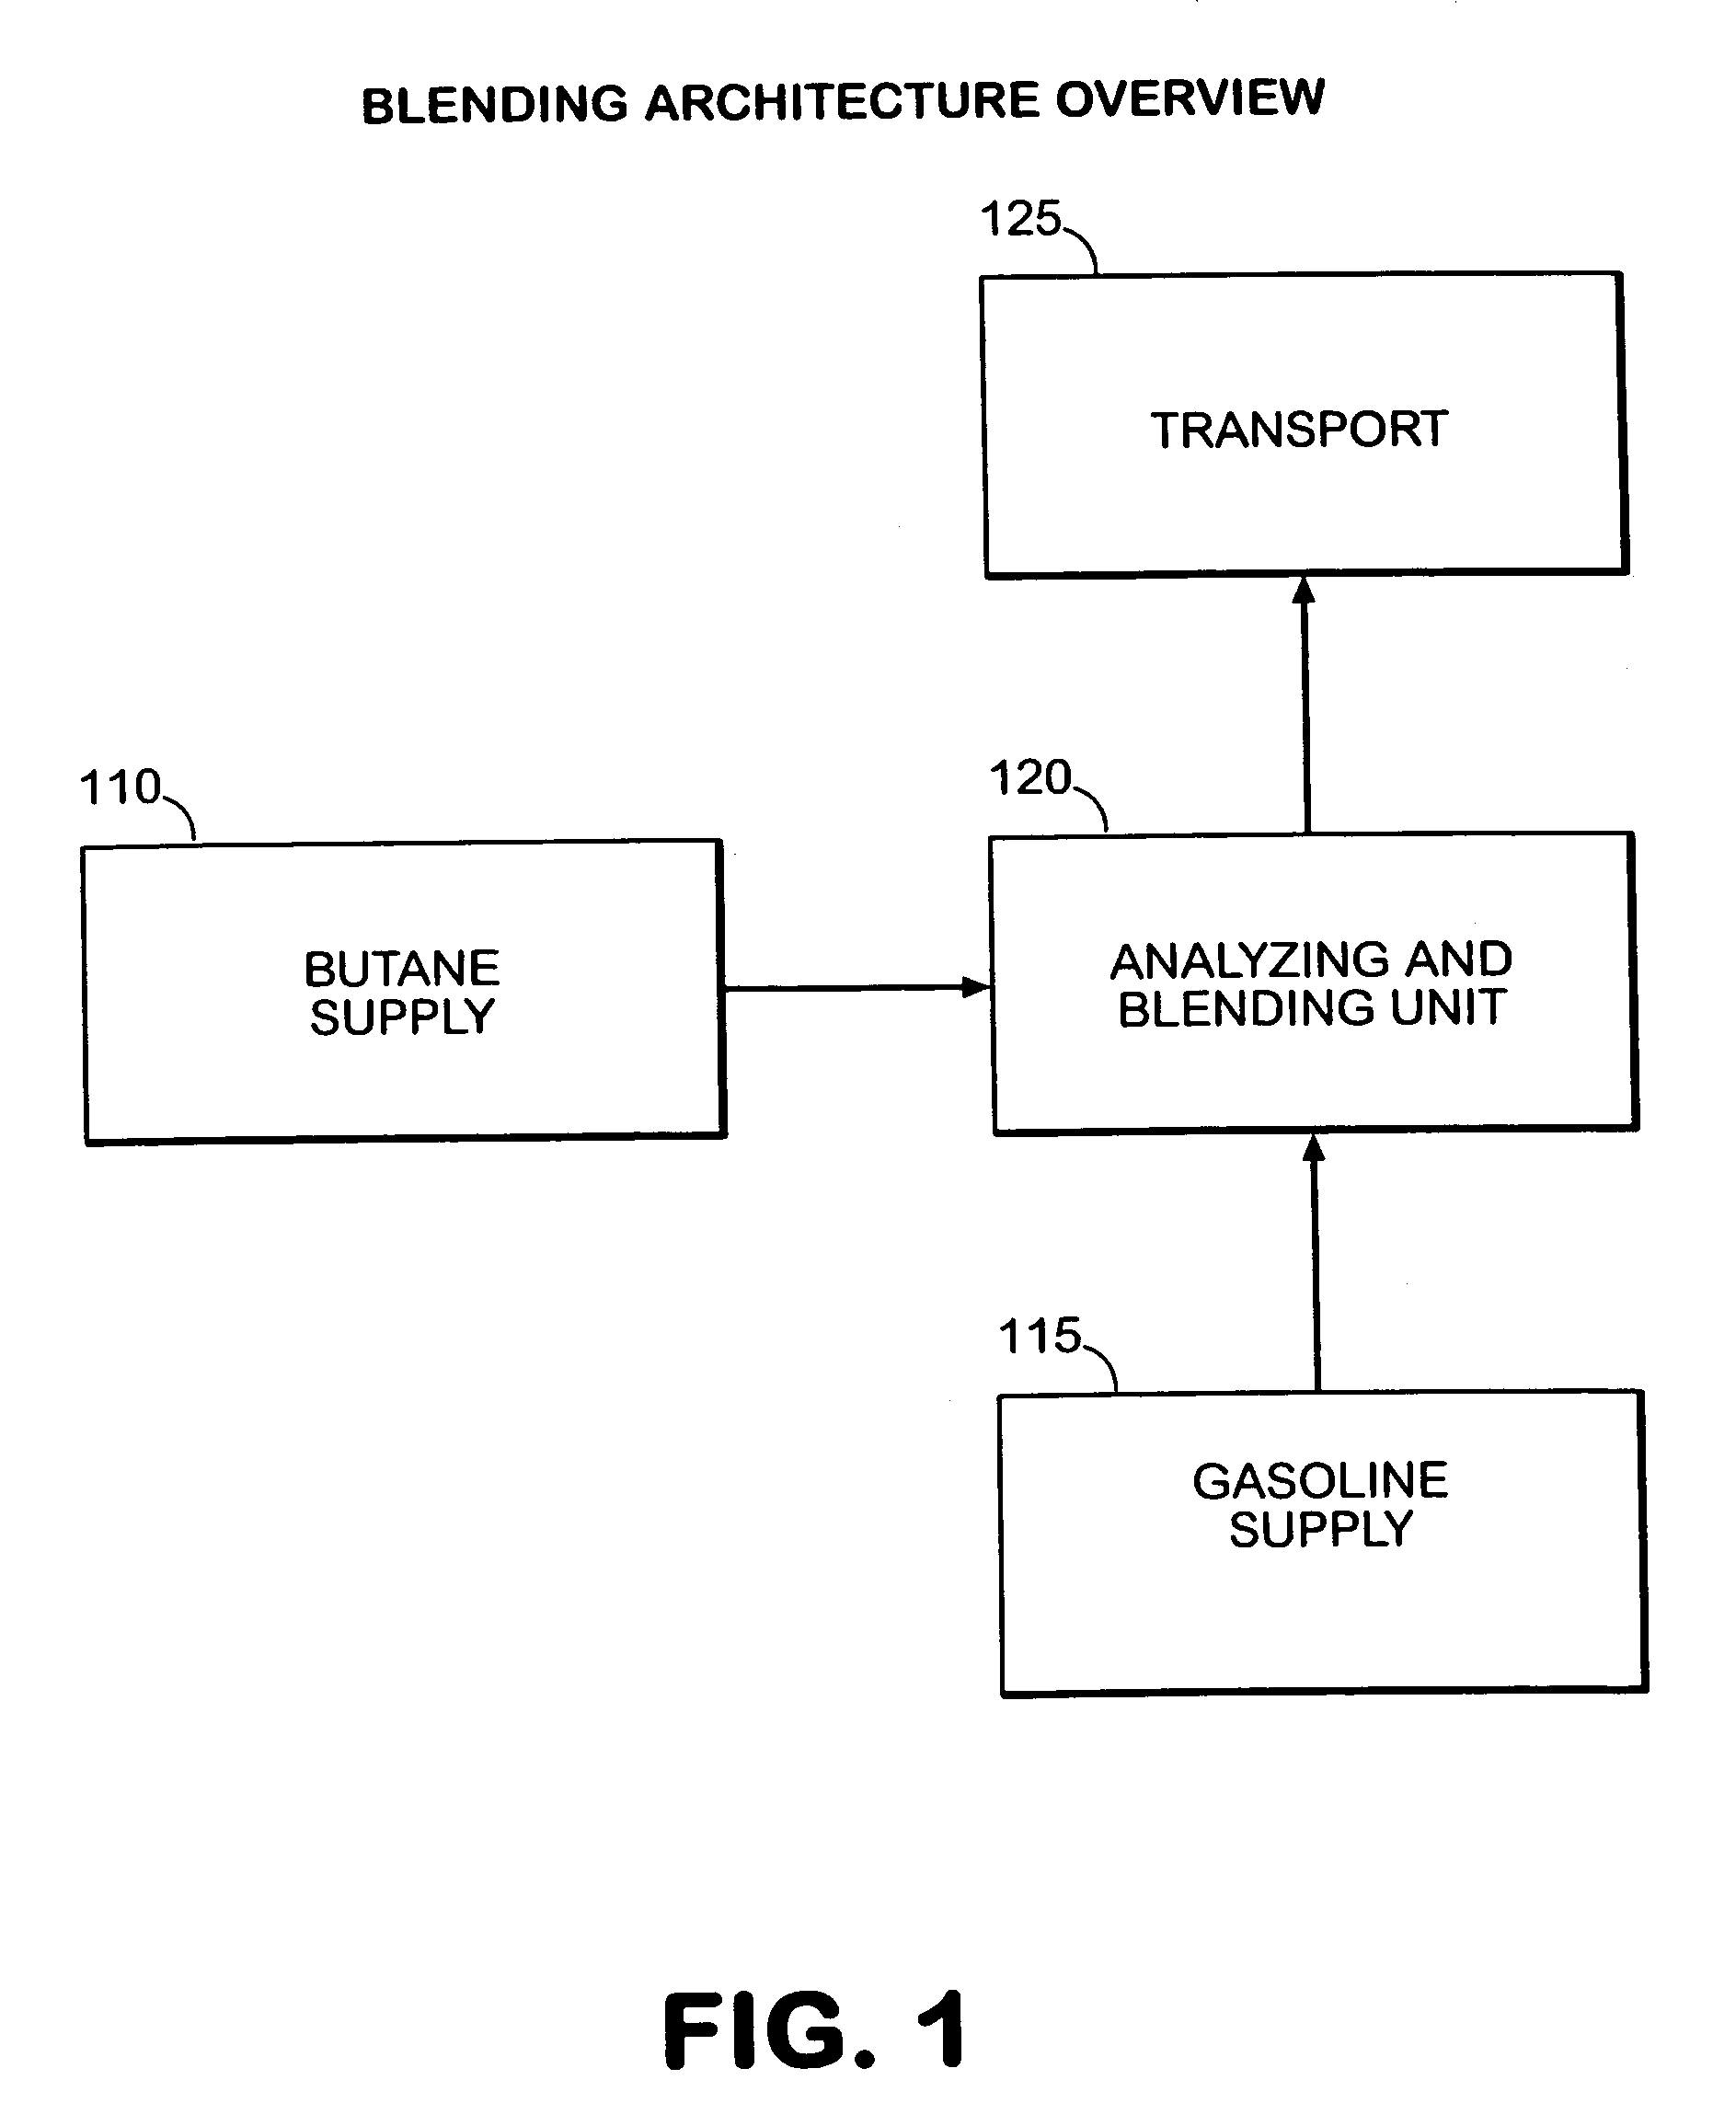 Method and system for blending gasoline and butane at the point of distribution